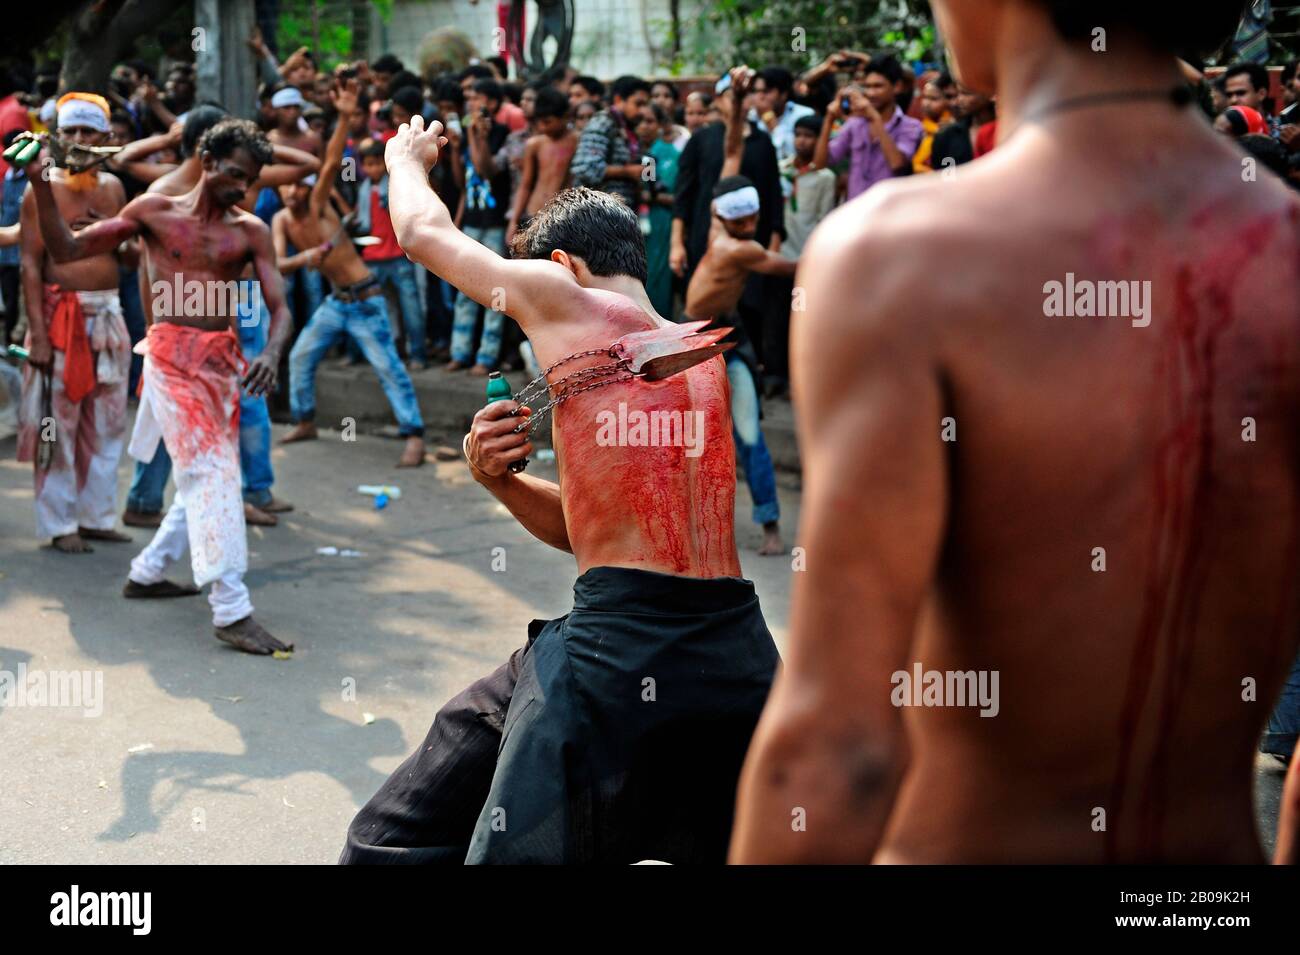 Young men from the Muslim Shia community flagellate themselves during a mourning procession of the holy Ashura on the 10th day of the holy month of Muharram. Ashura marks the martyrdom of Hazrat Imam Hassan and Hussain the grand sons of Prophet Muhammad, who were killed in a battle. Dhaka, Bangladesh. December 6, 2011. Stock Photo